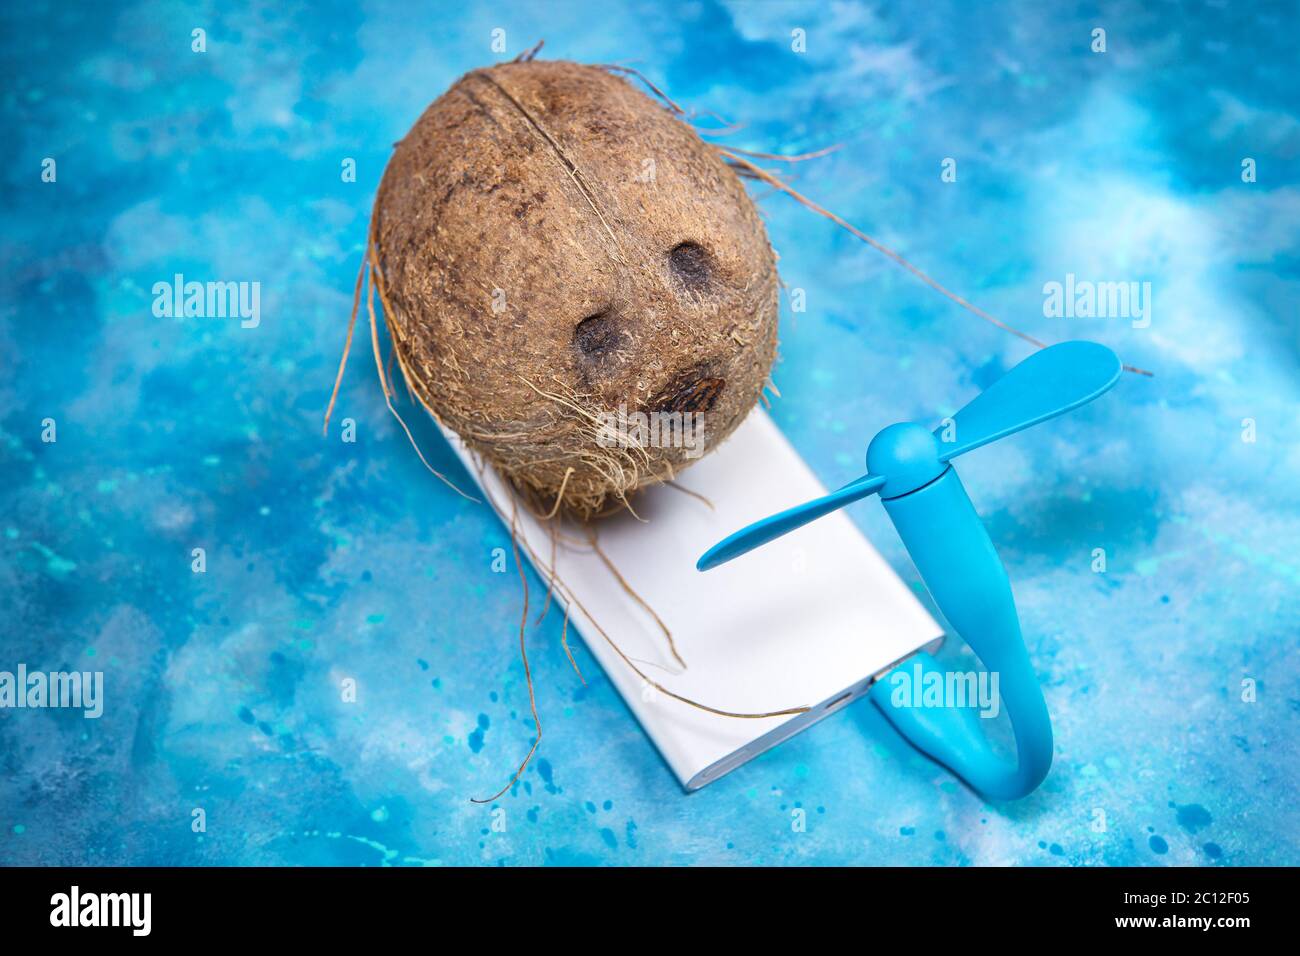 Coconut is cooling off in front of a portable fan powered by a mobile power bank on a blue background. Tropical summer heat wave concept. Stock Photo